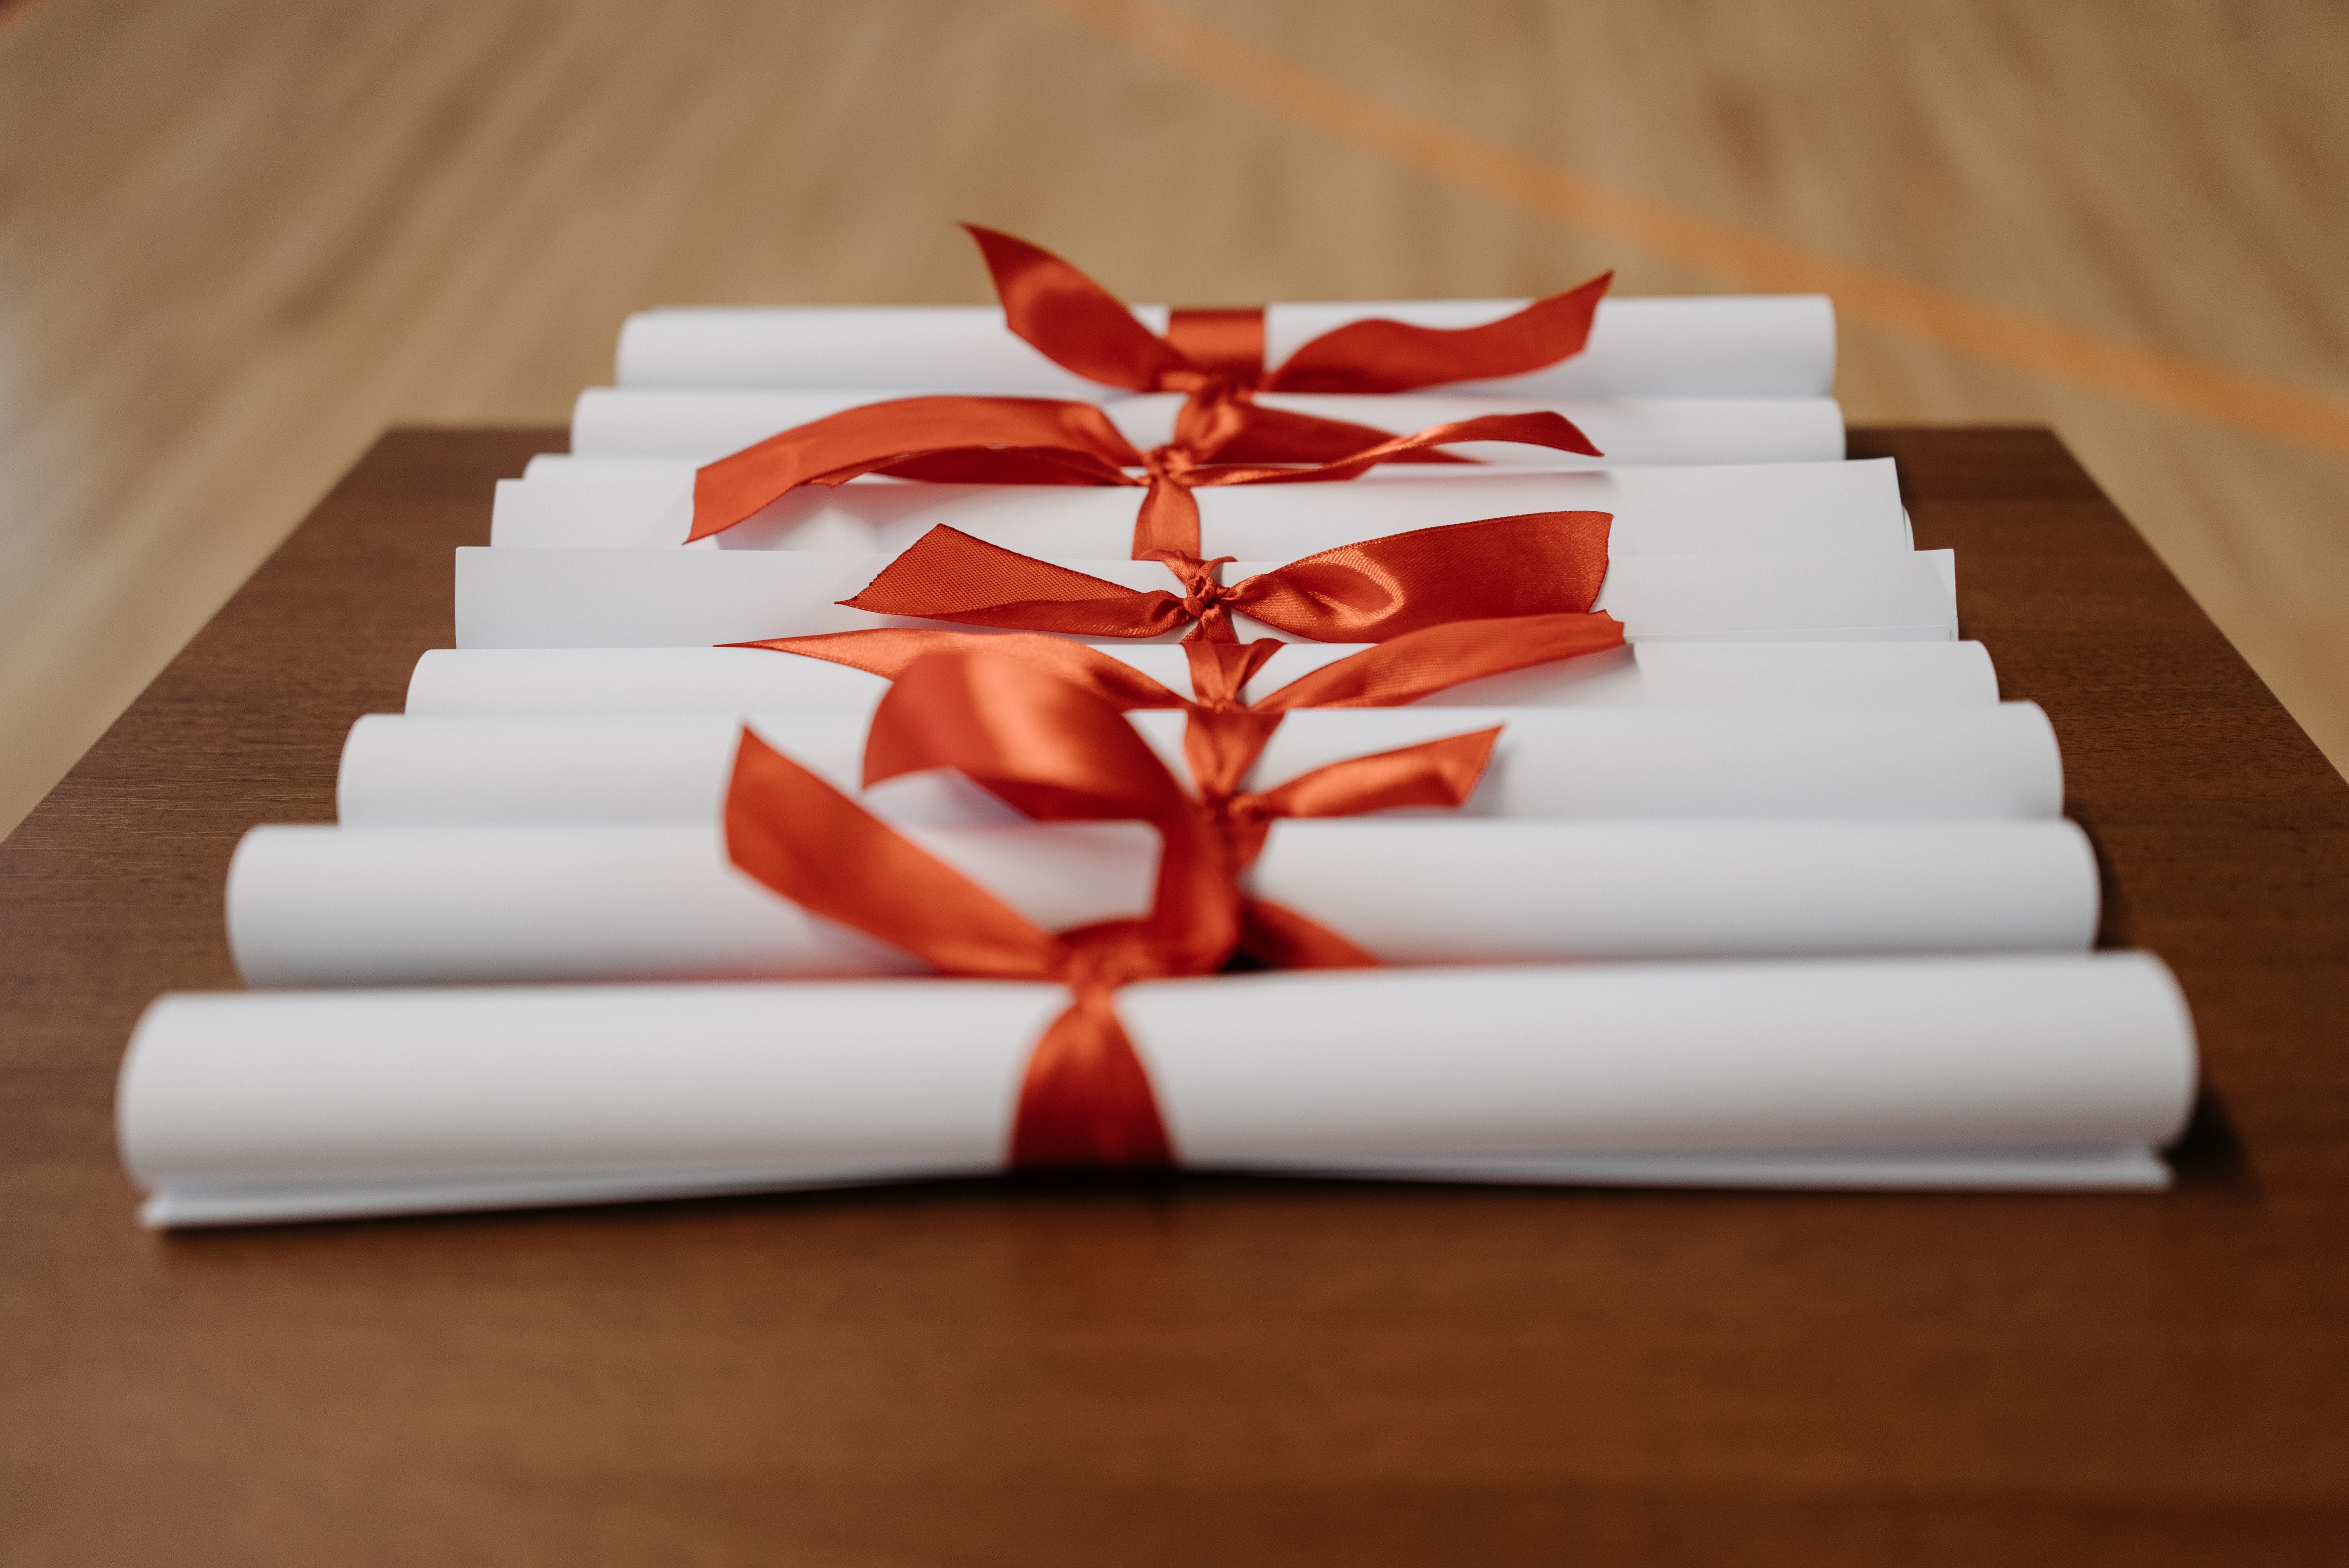 Paper scrolls representing higher diplomas are lined up on a wooden table